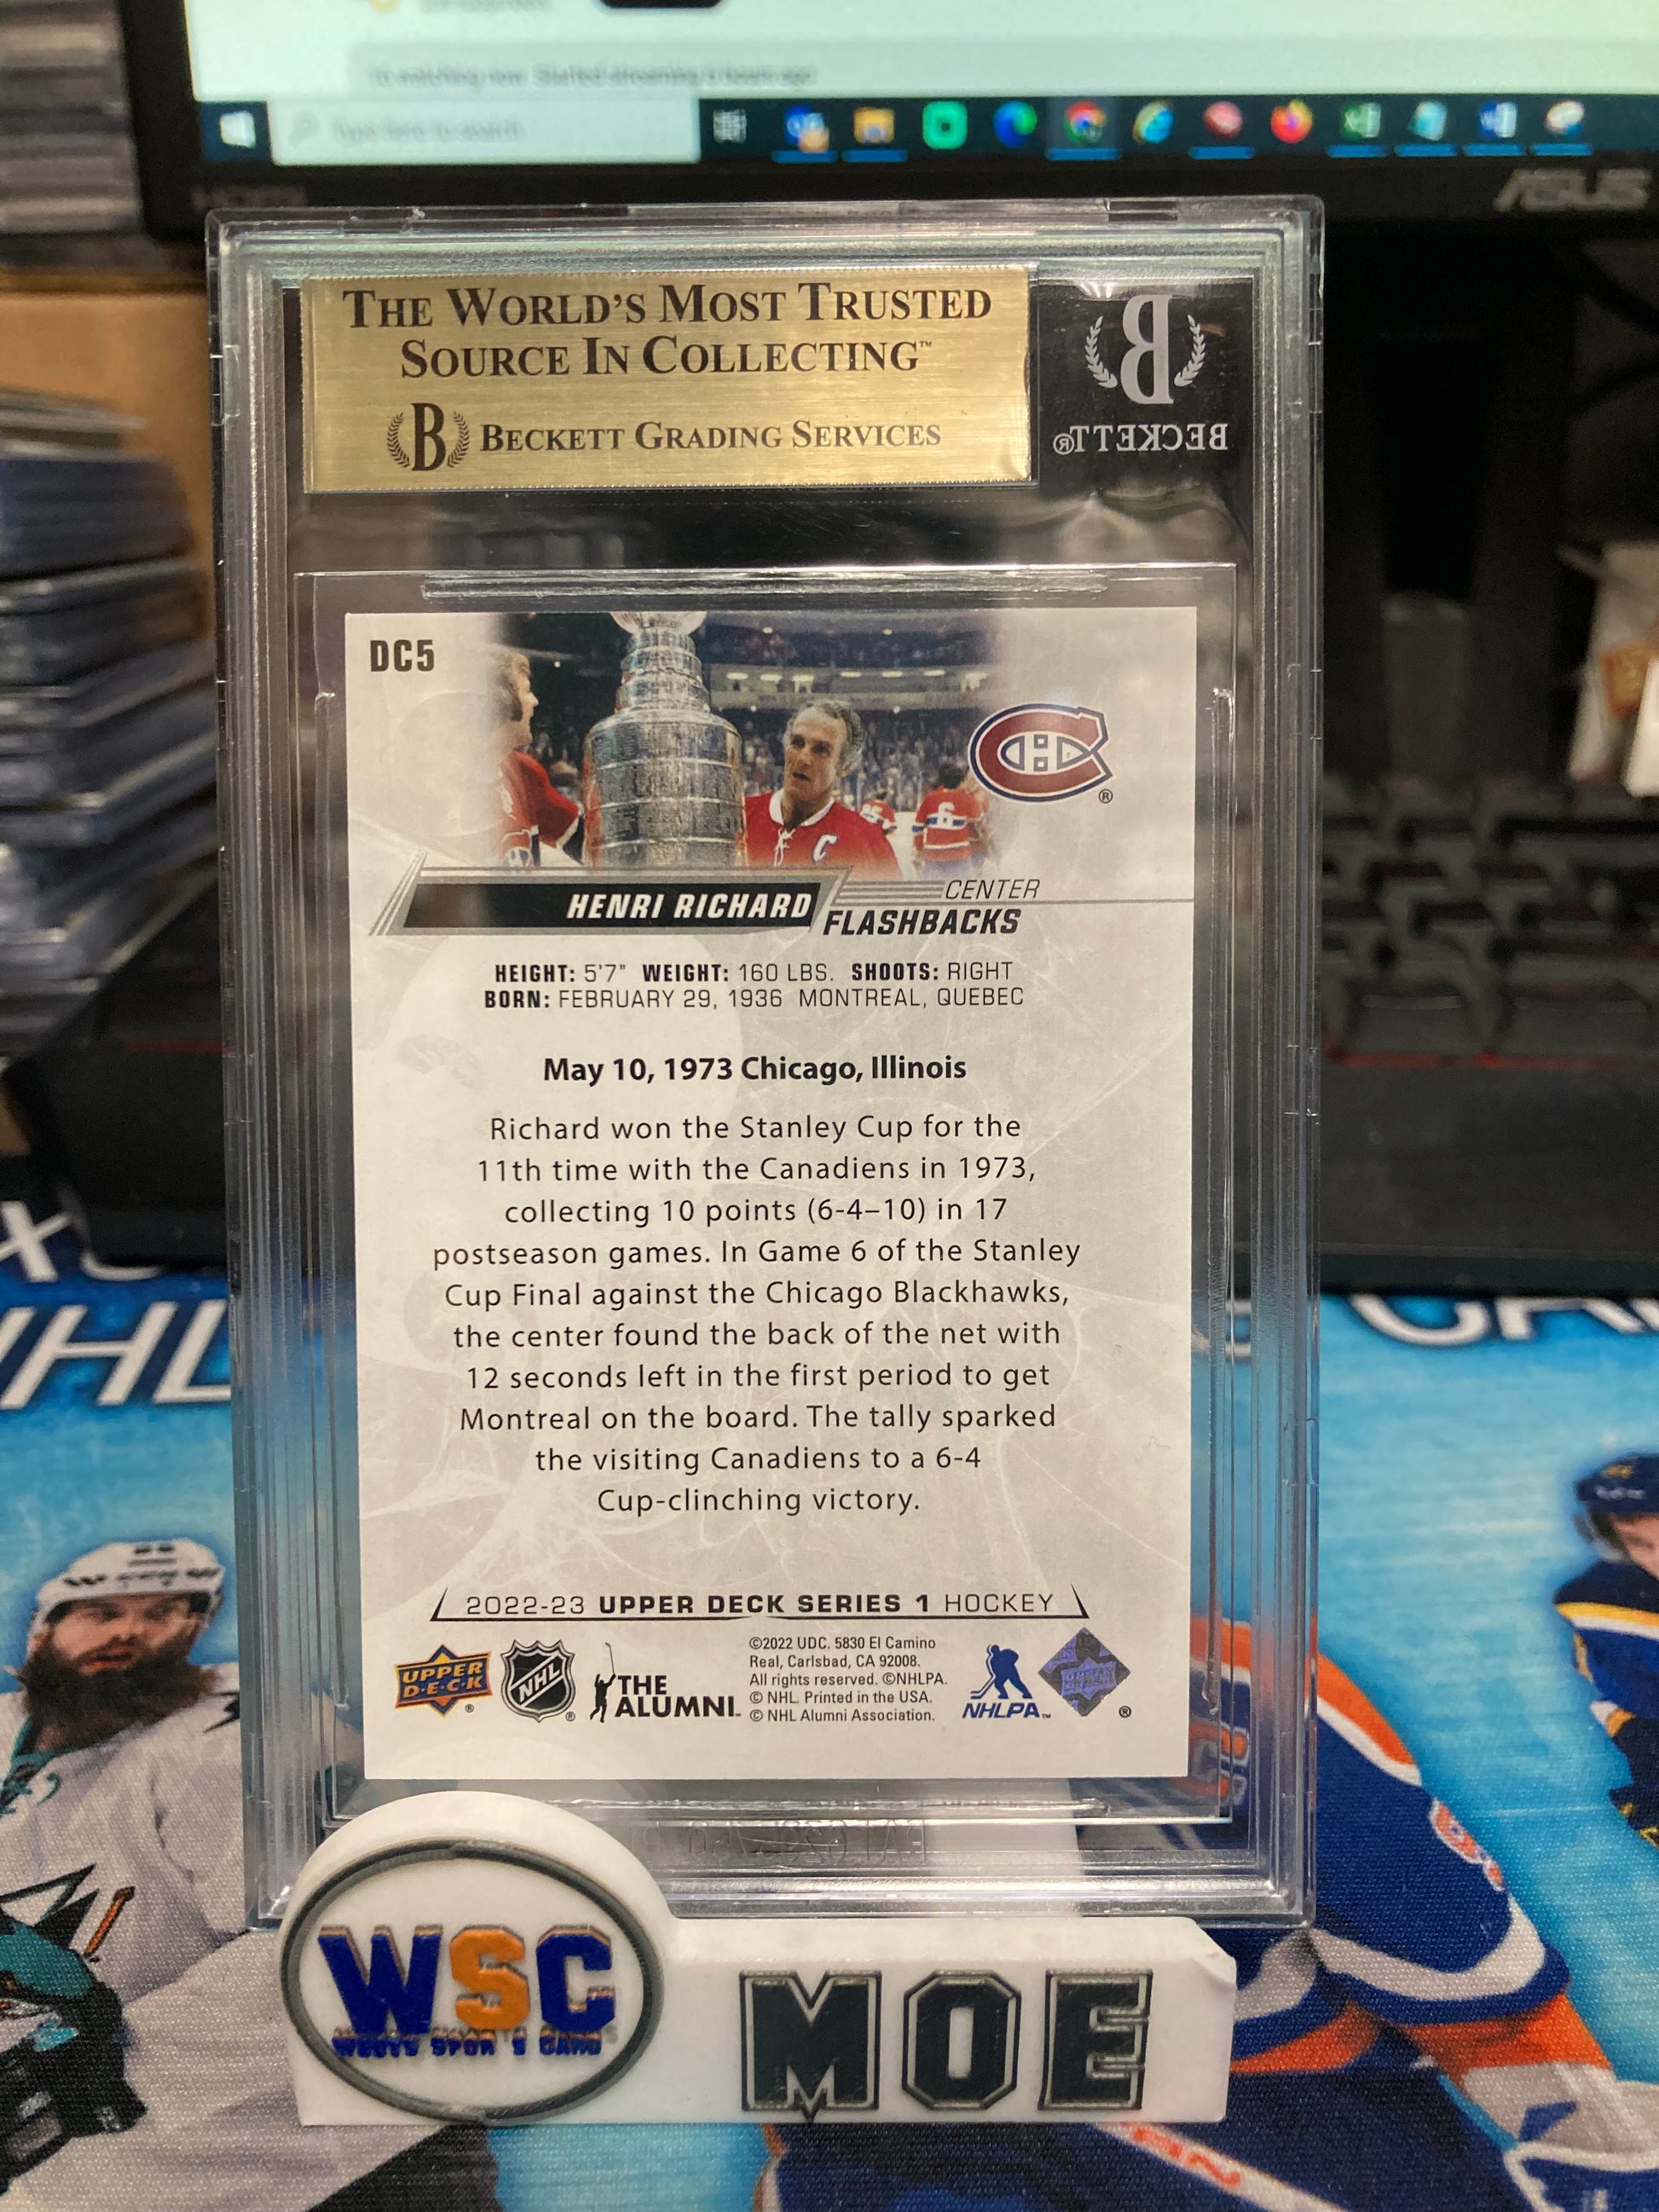 West’s Sports Cards (WSC) 2022-23 Henri Richard Upper Deck DAY WITH THE CUP FLASHBACKS | BGS 9.5